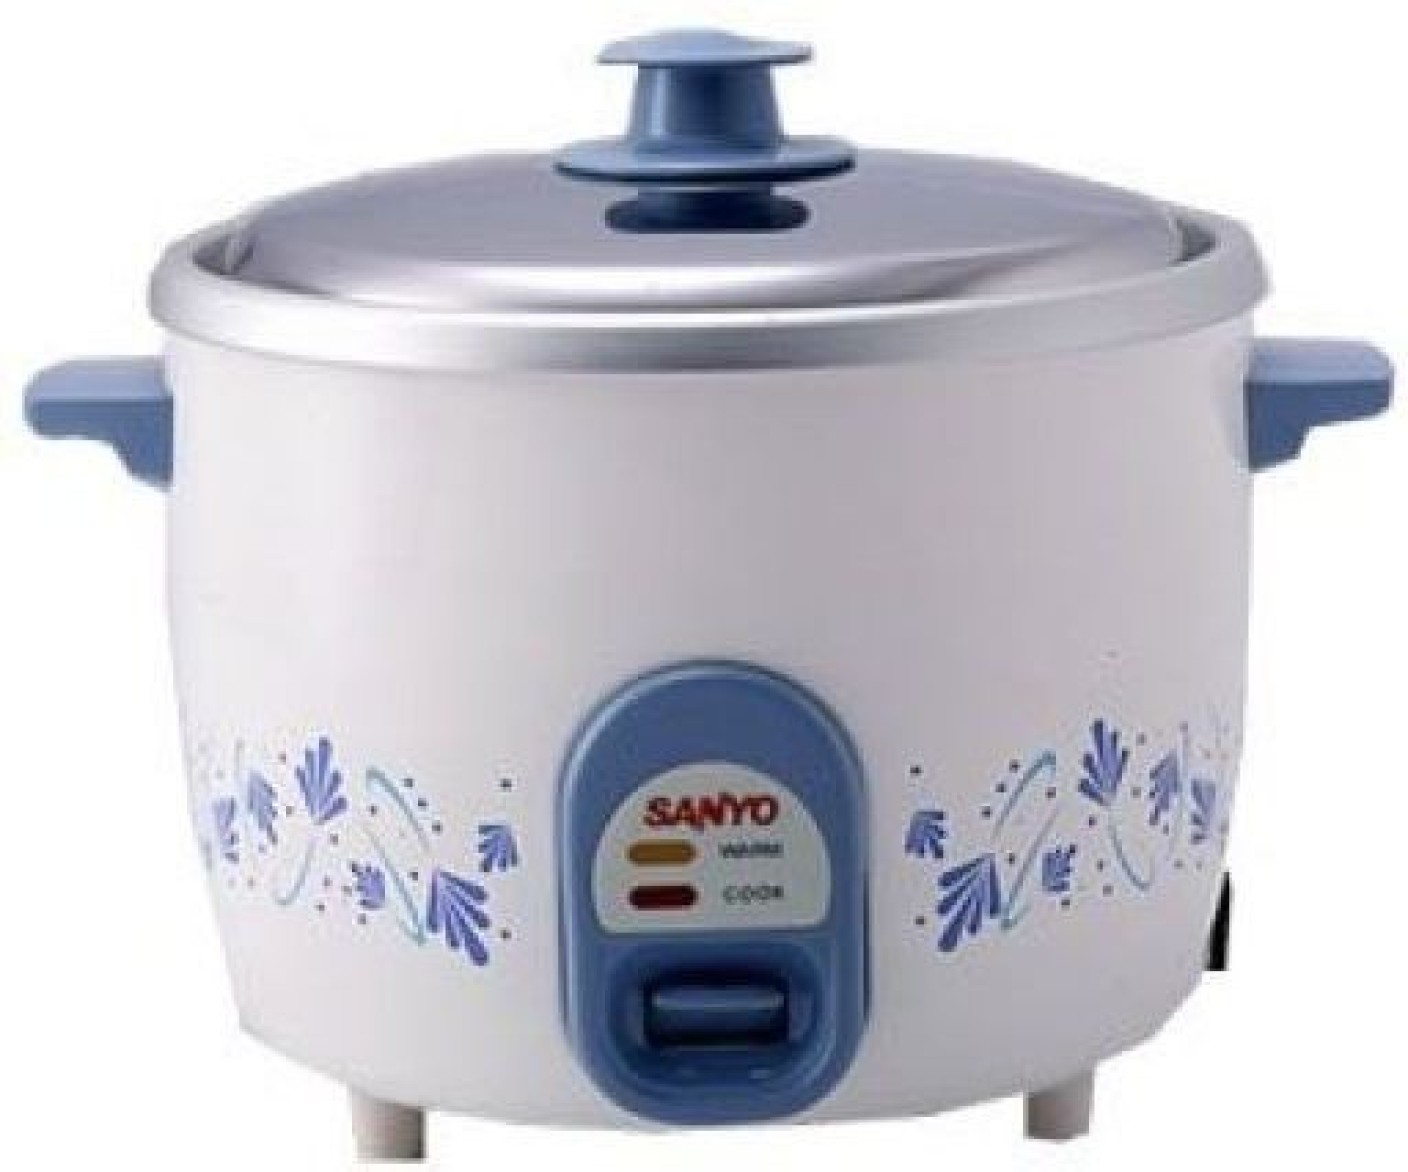 Sanyo EC-188 Electric Rice Cooker with Steaming Feature Price in India